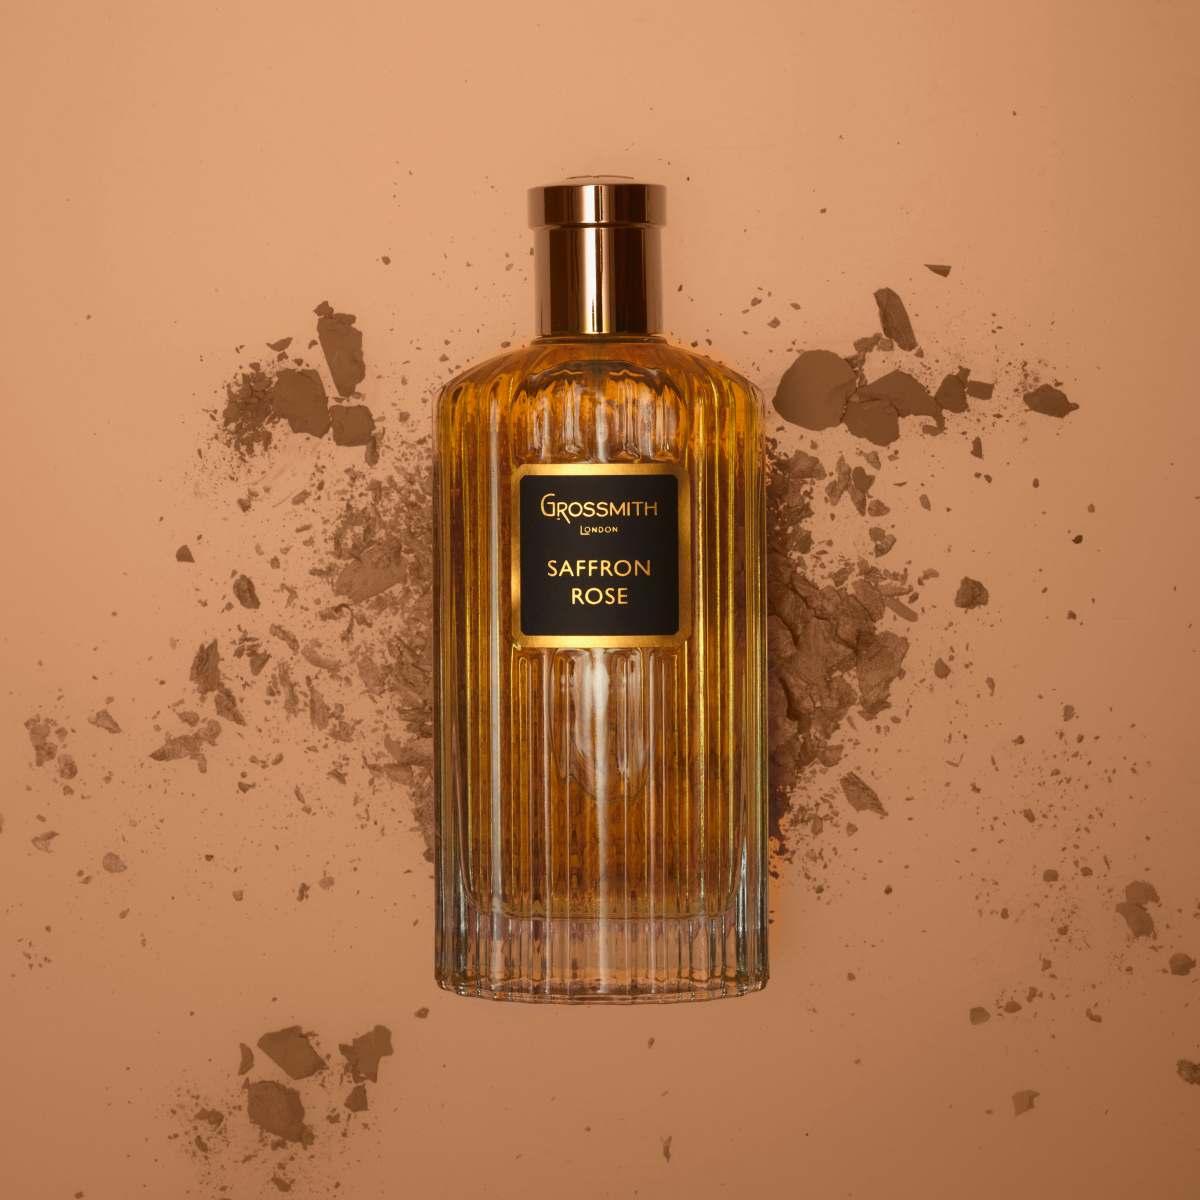 Image of the perfume Saffron Rose by the brand Grossmith